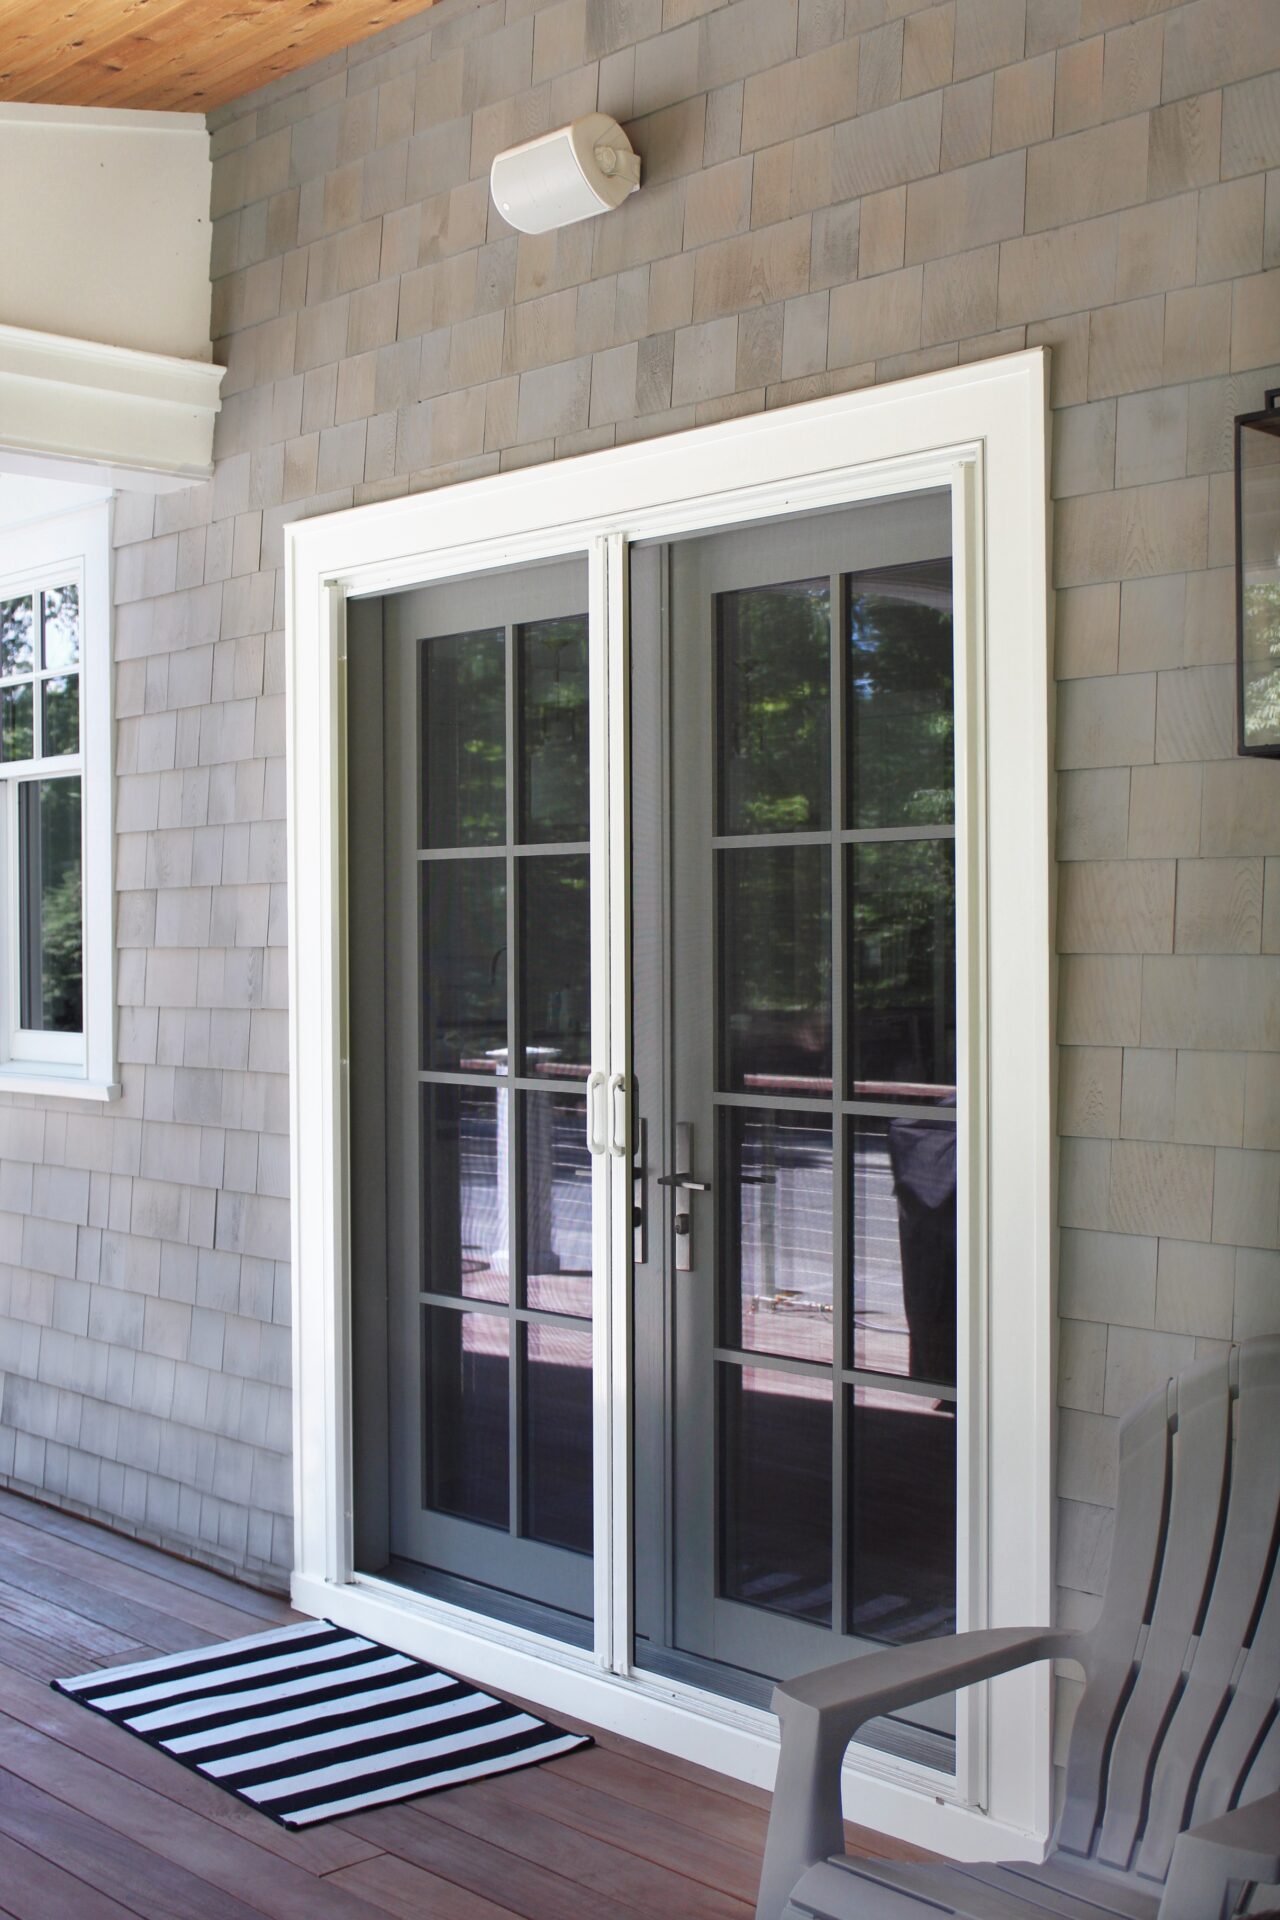 Screening Solutions Ohio uses a Phantom Retractable Screen on a set of double doors.